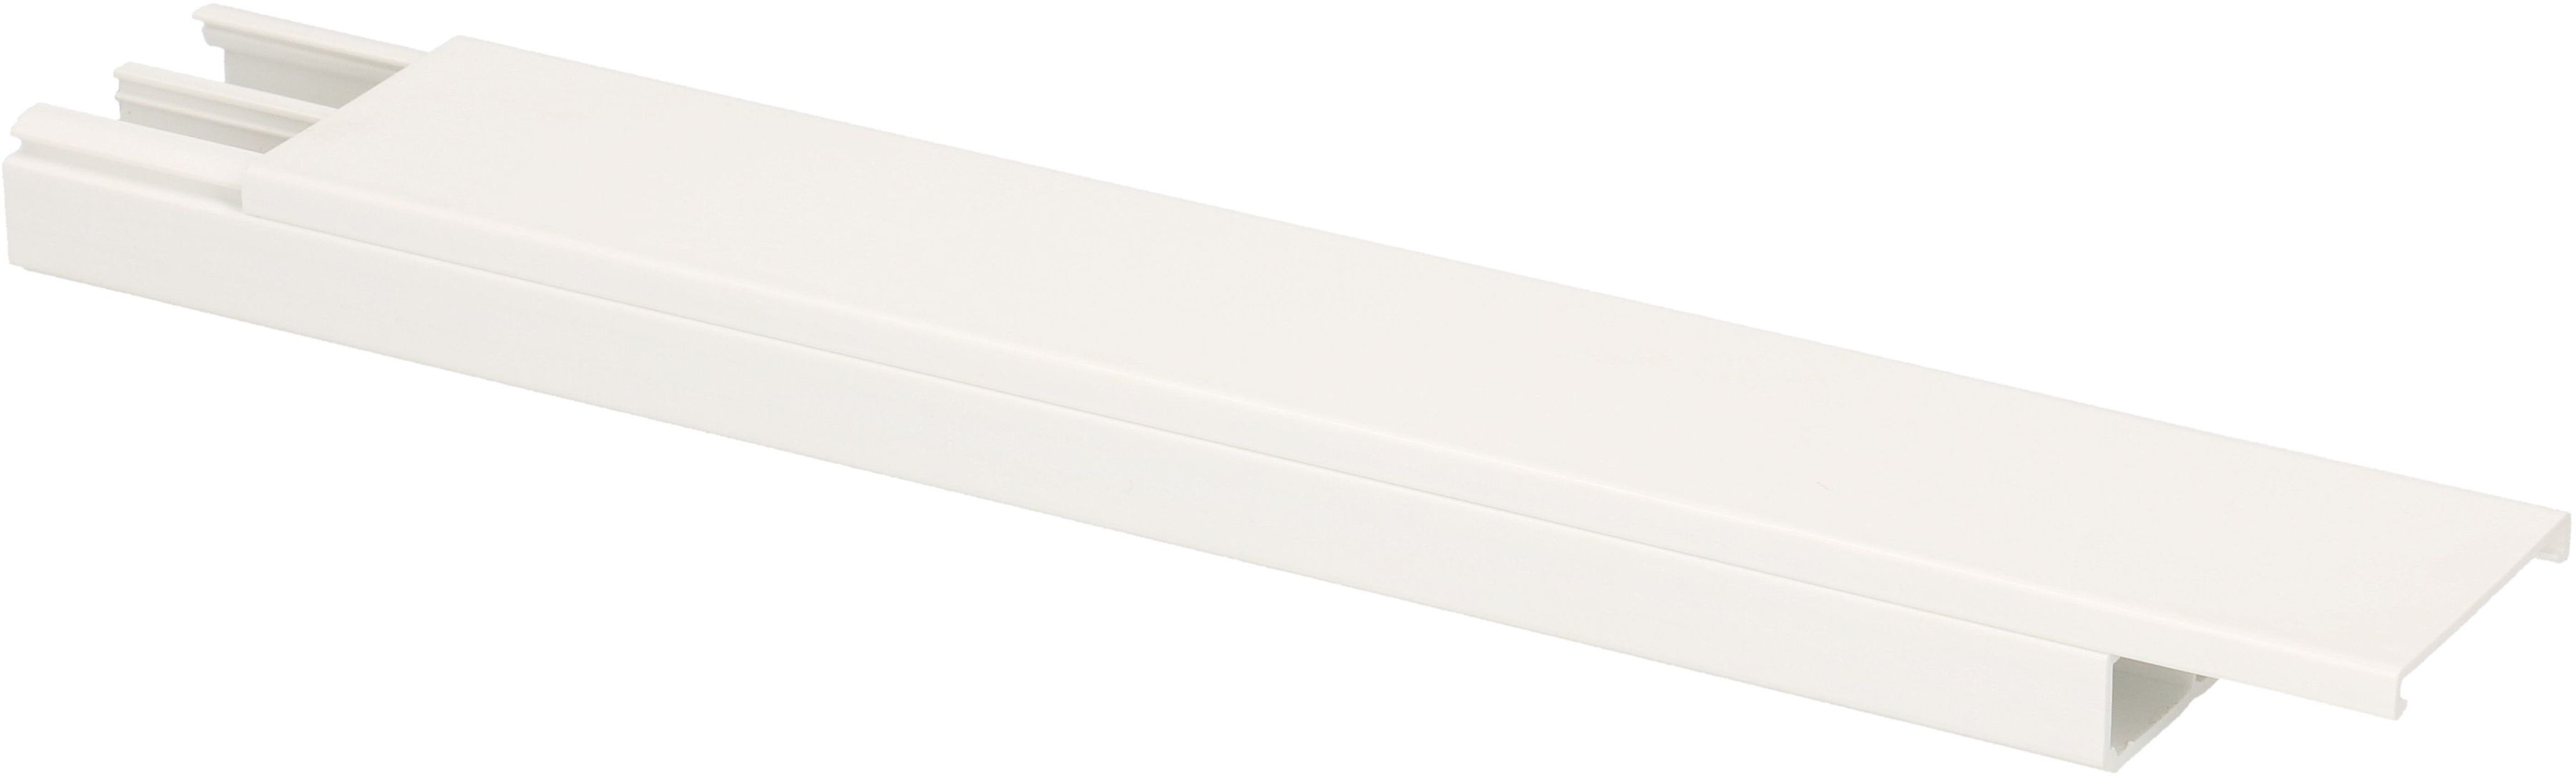 Cable duct white 35x16mm white